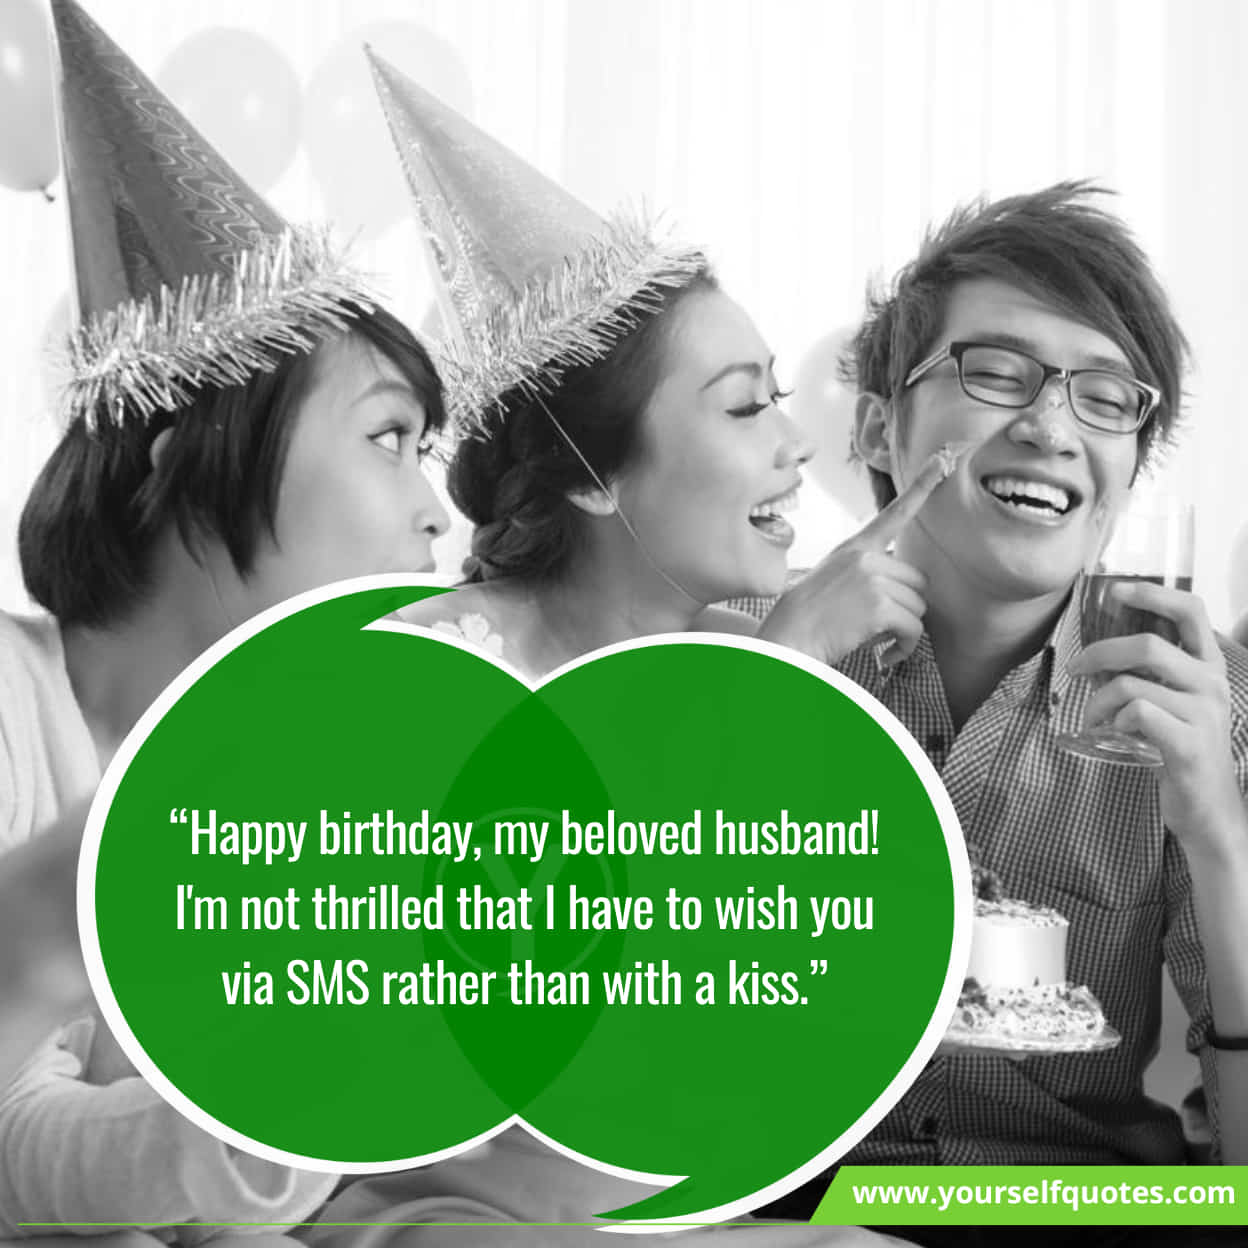 Best Romantic Long Distance Birthday Wishes for Husband